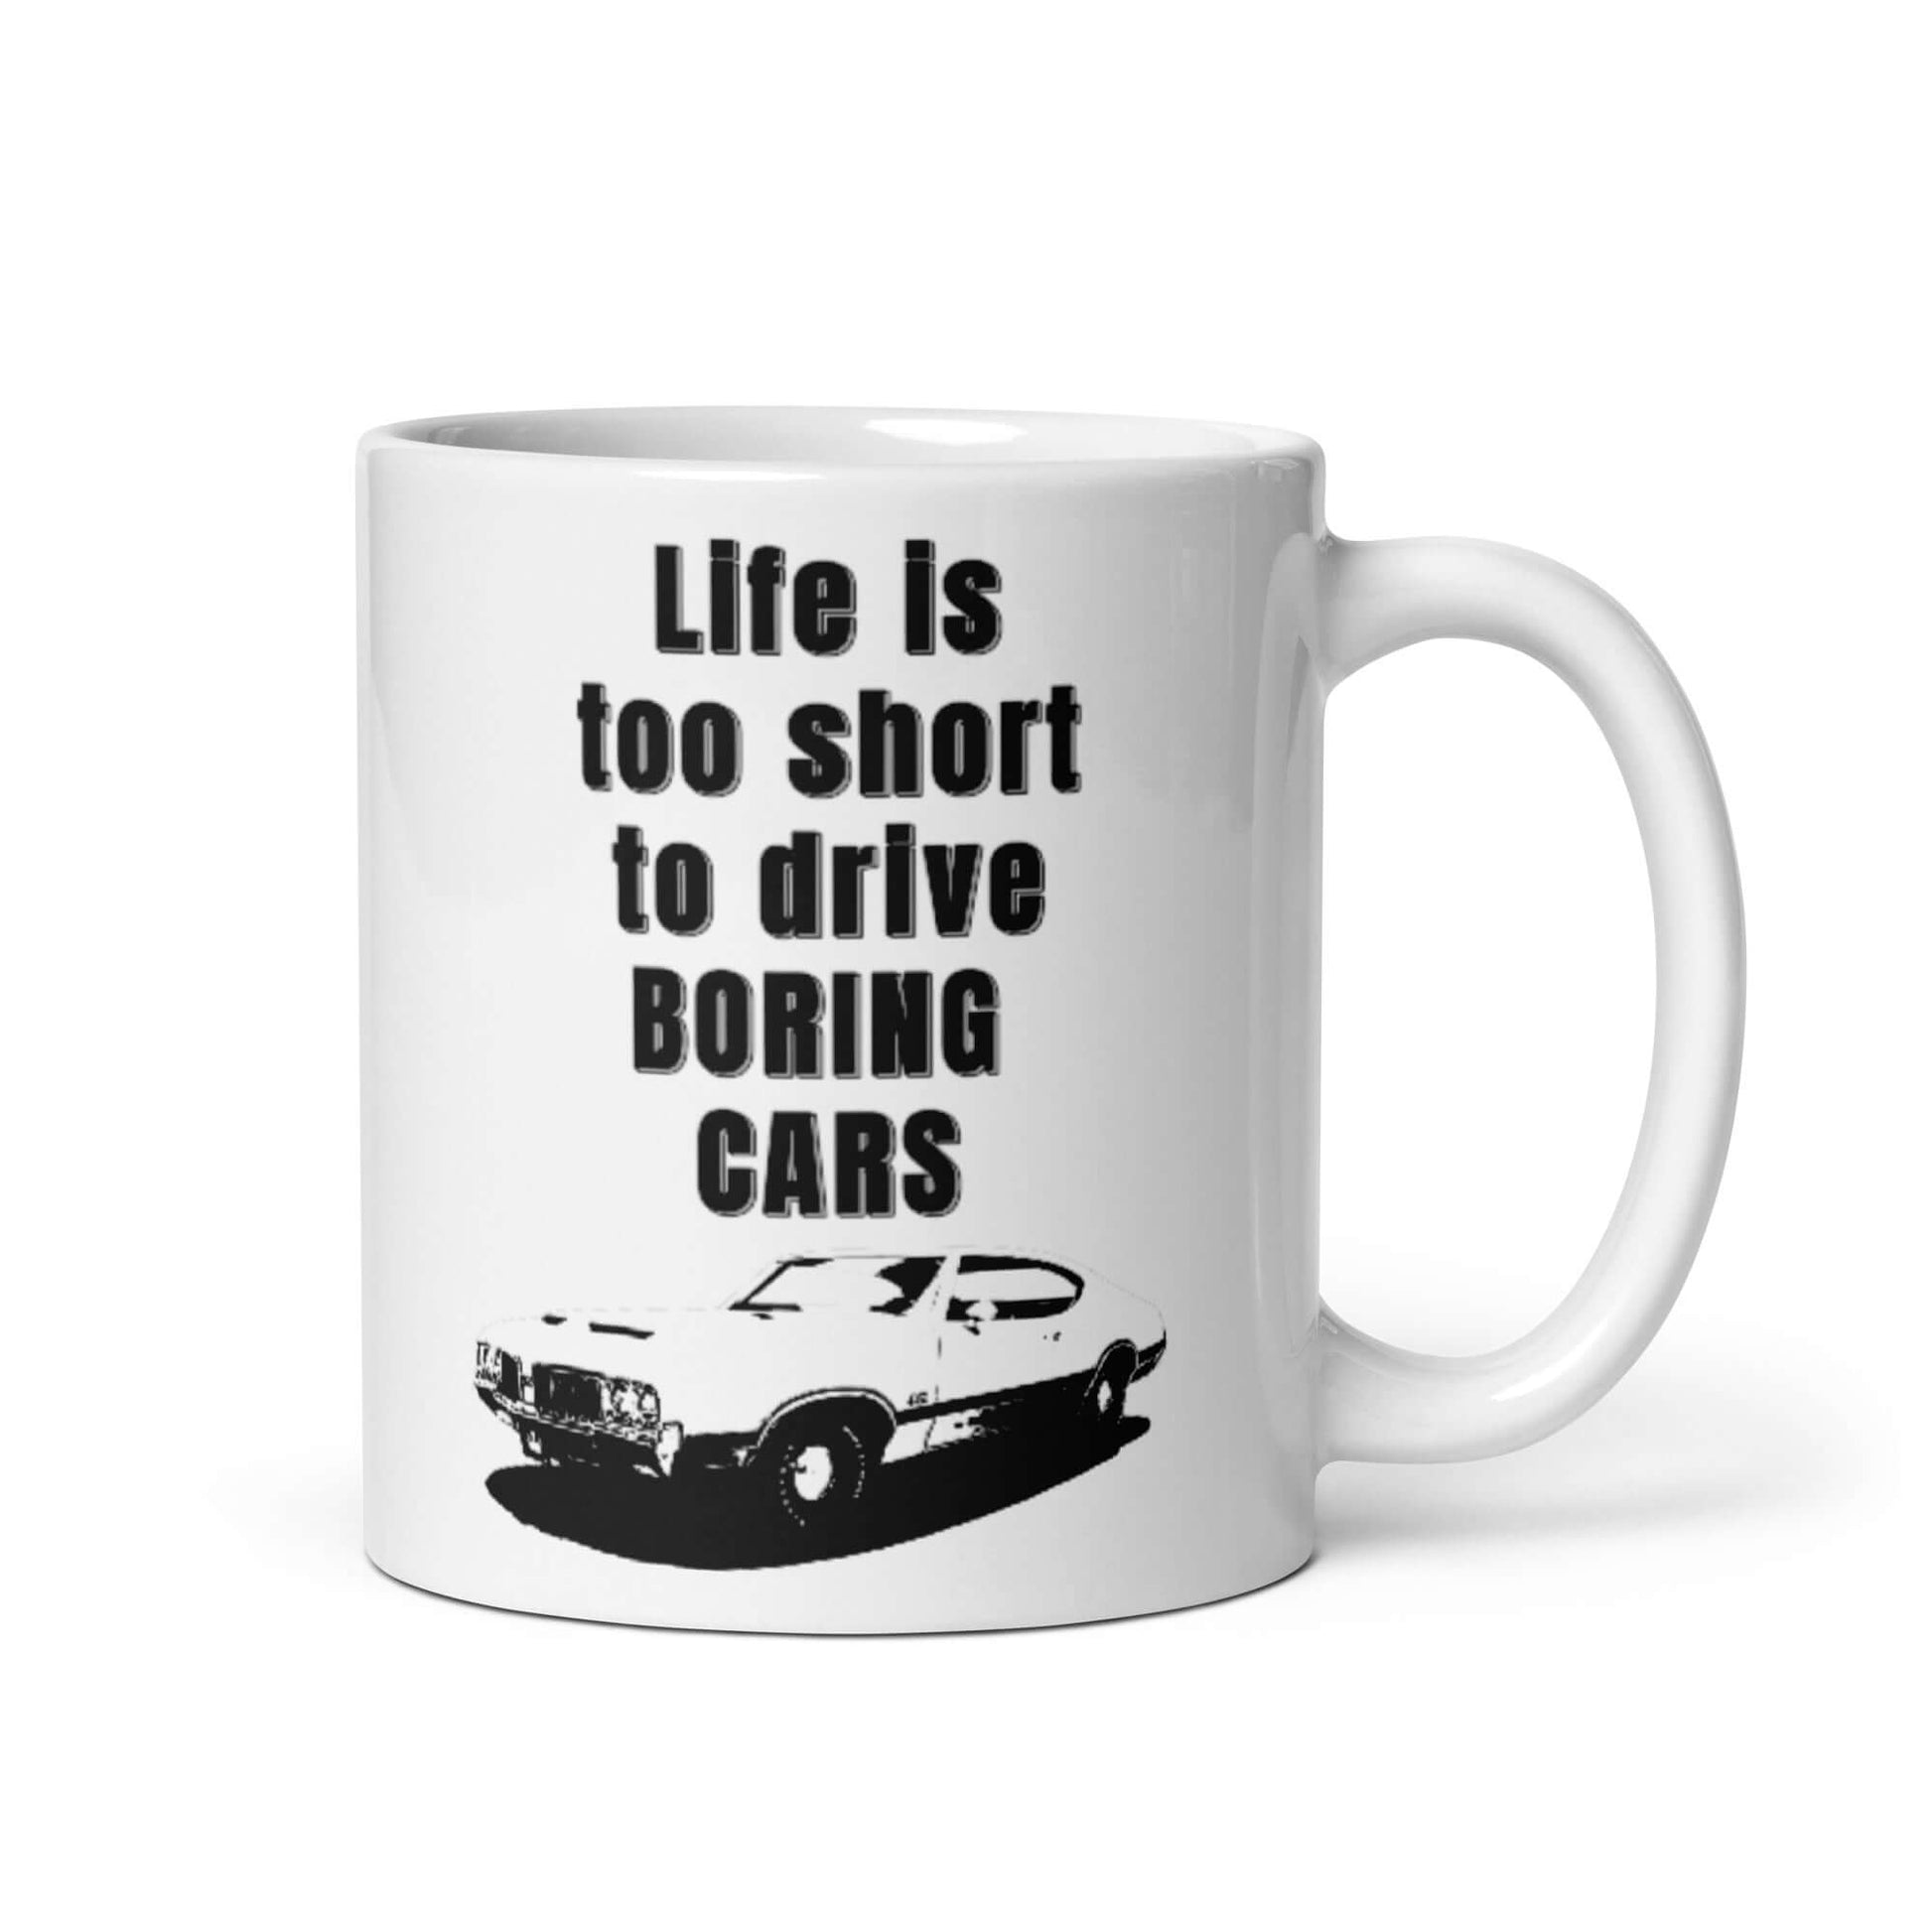 Life is too short to be driving boring cars - 1970 Oldsmobile 442 - White glossy mug - Horrible Designs